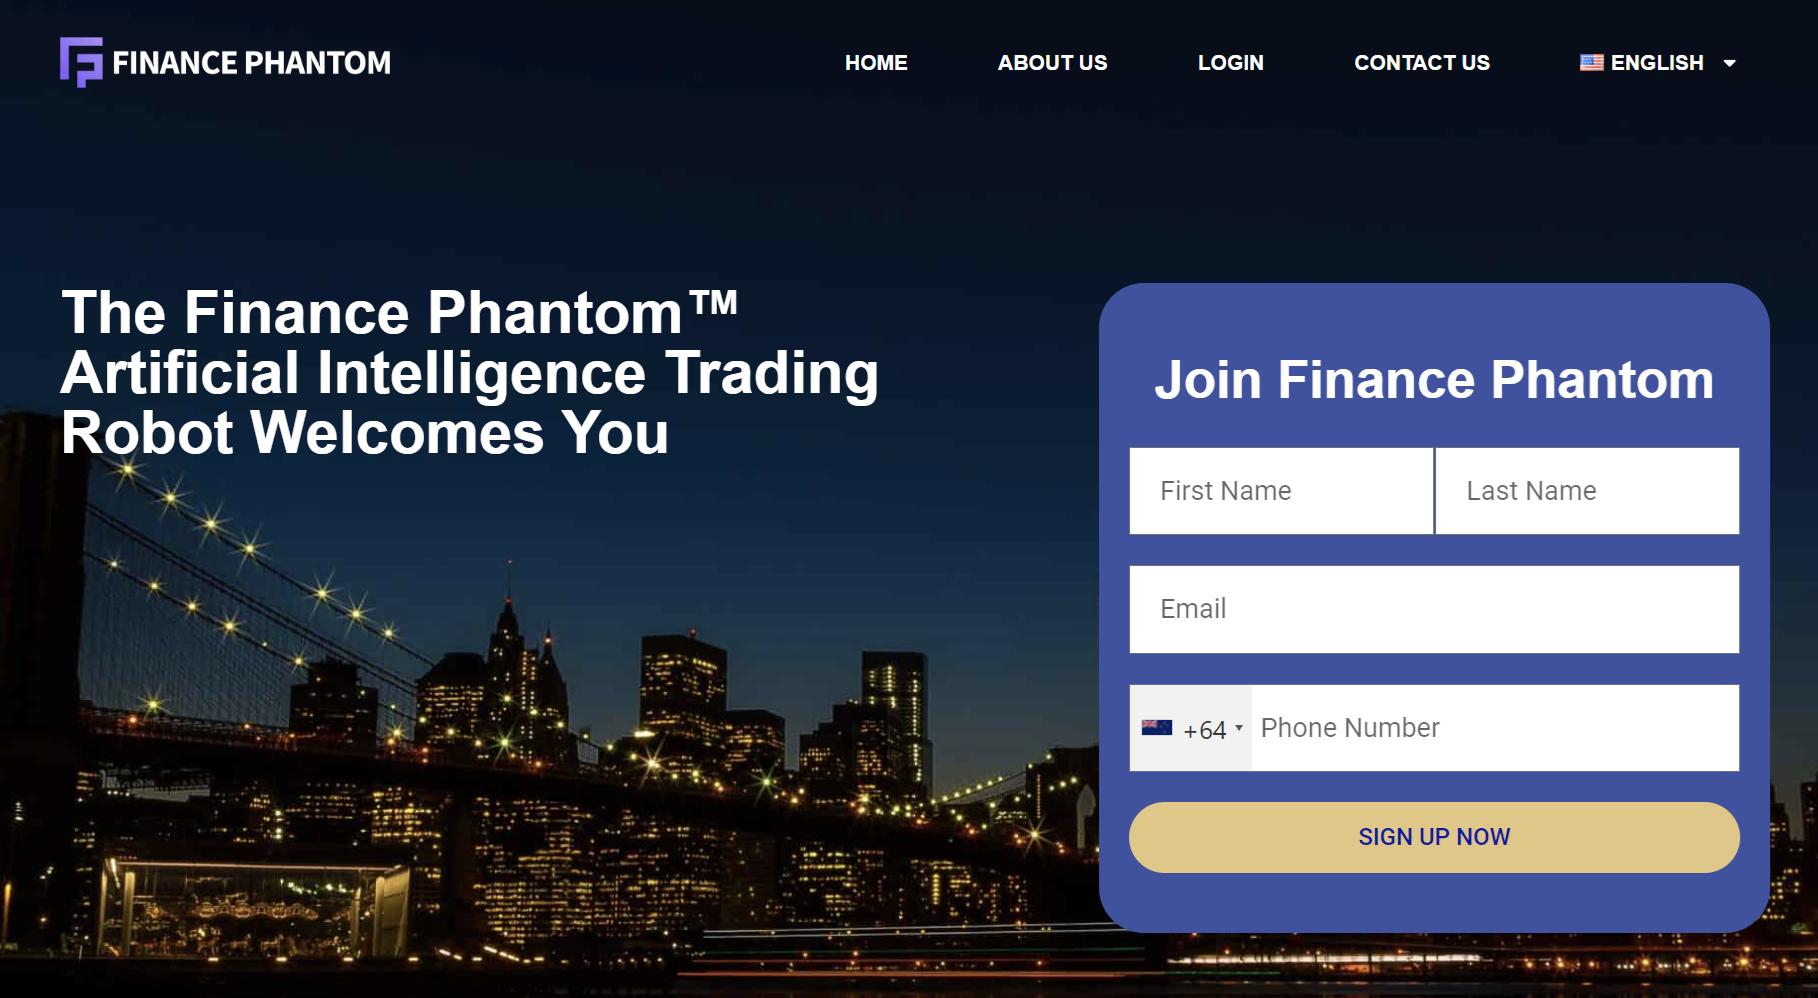 Finance Phantom Review - An AI Crypto Trading Bot That Meets Traders' Preferences